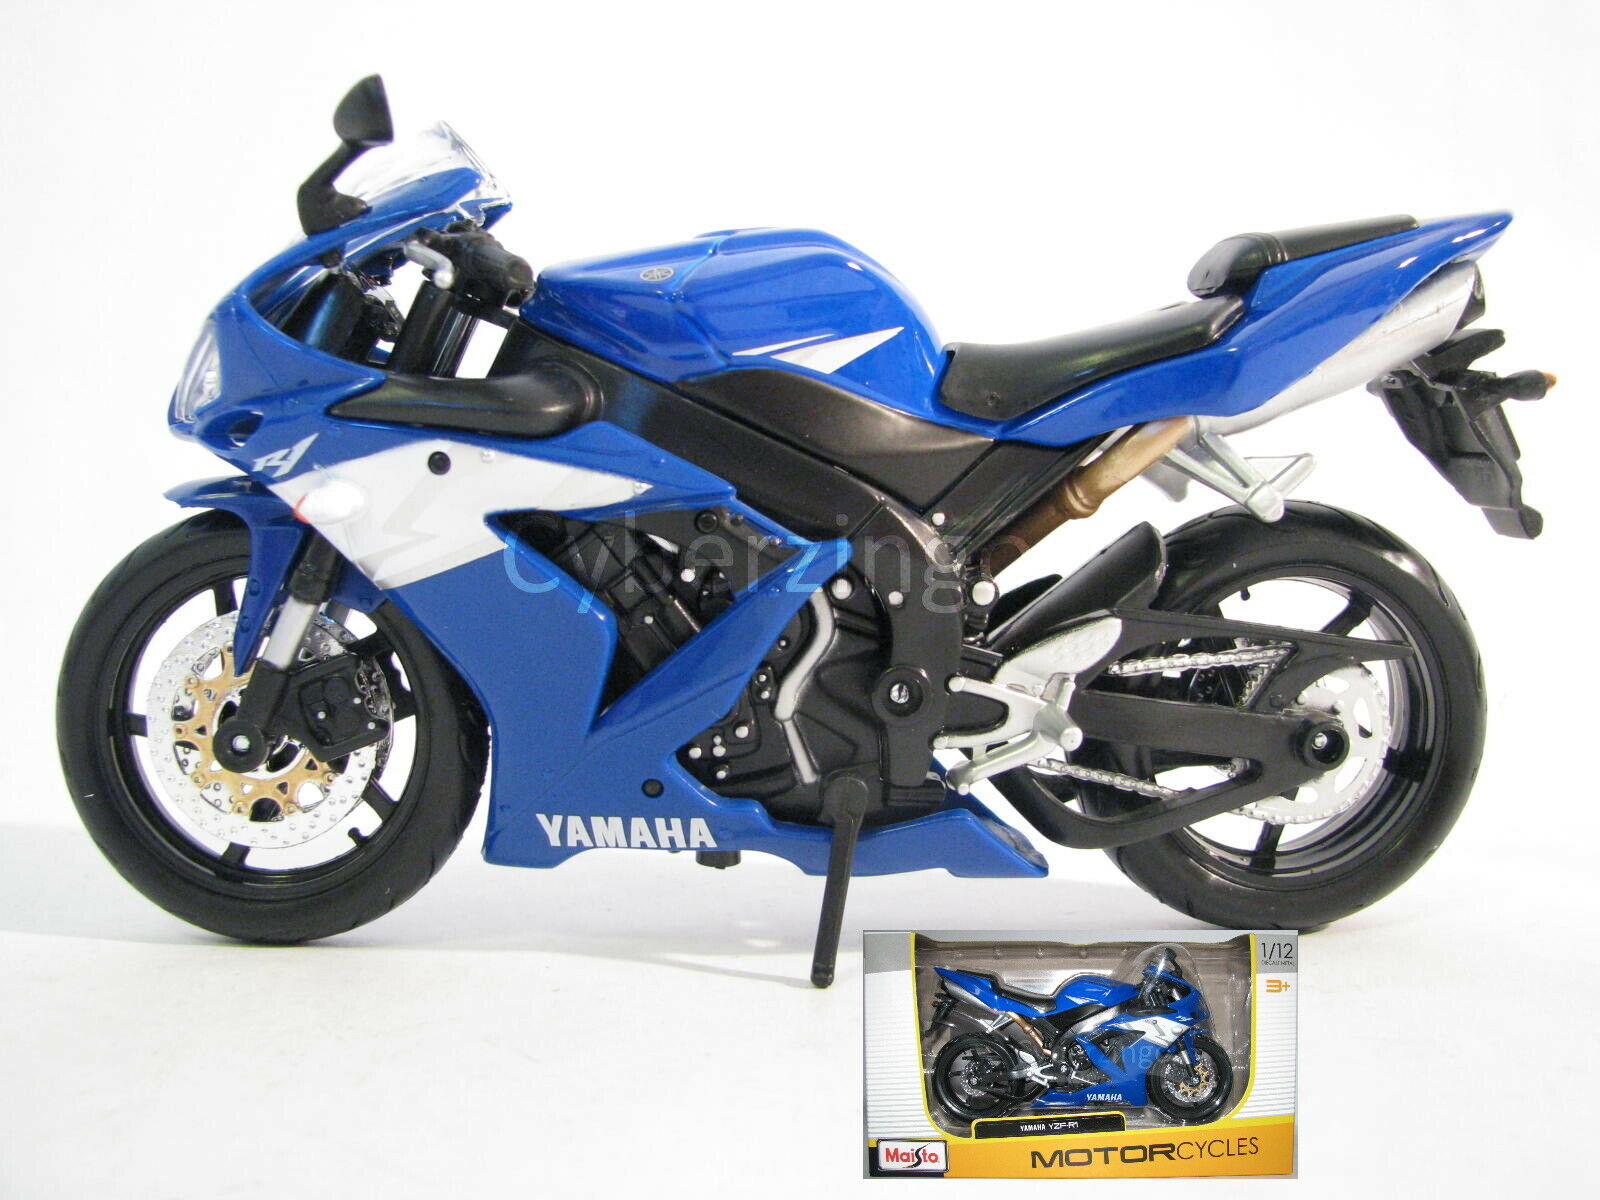 Yamaha Yzf-r1 1:12 Scale Maisto Model Motorcycle Brand New In The Box 31101